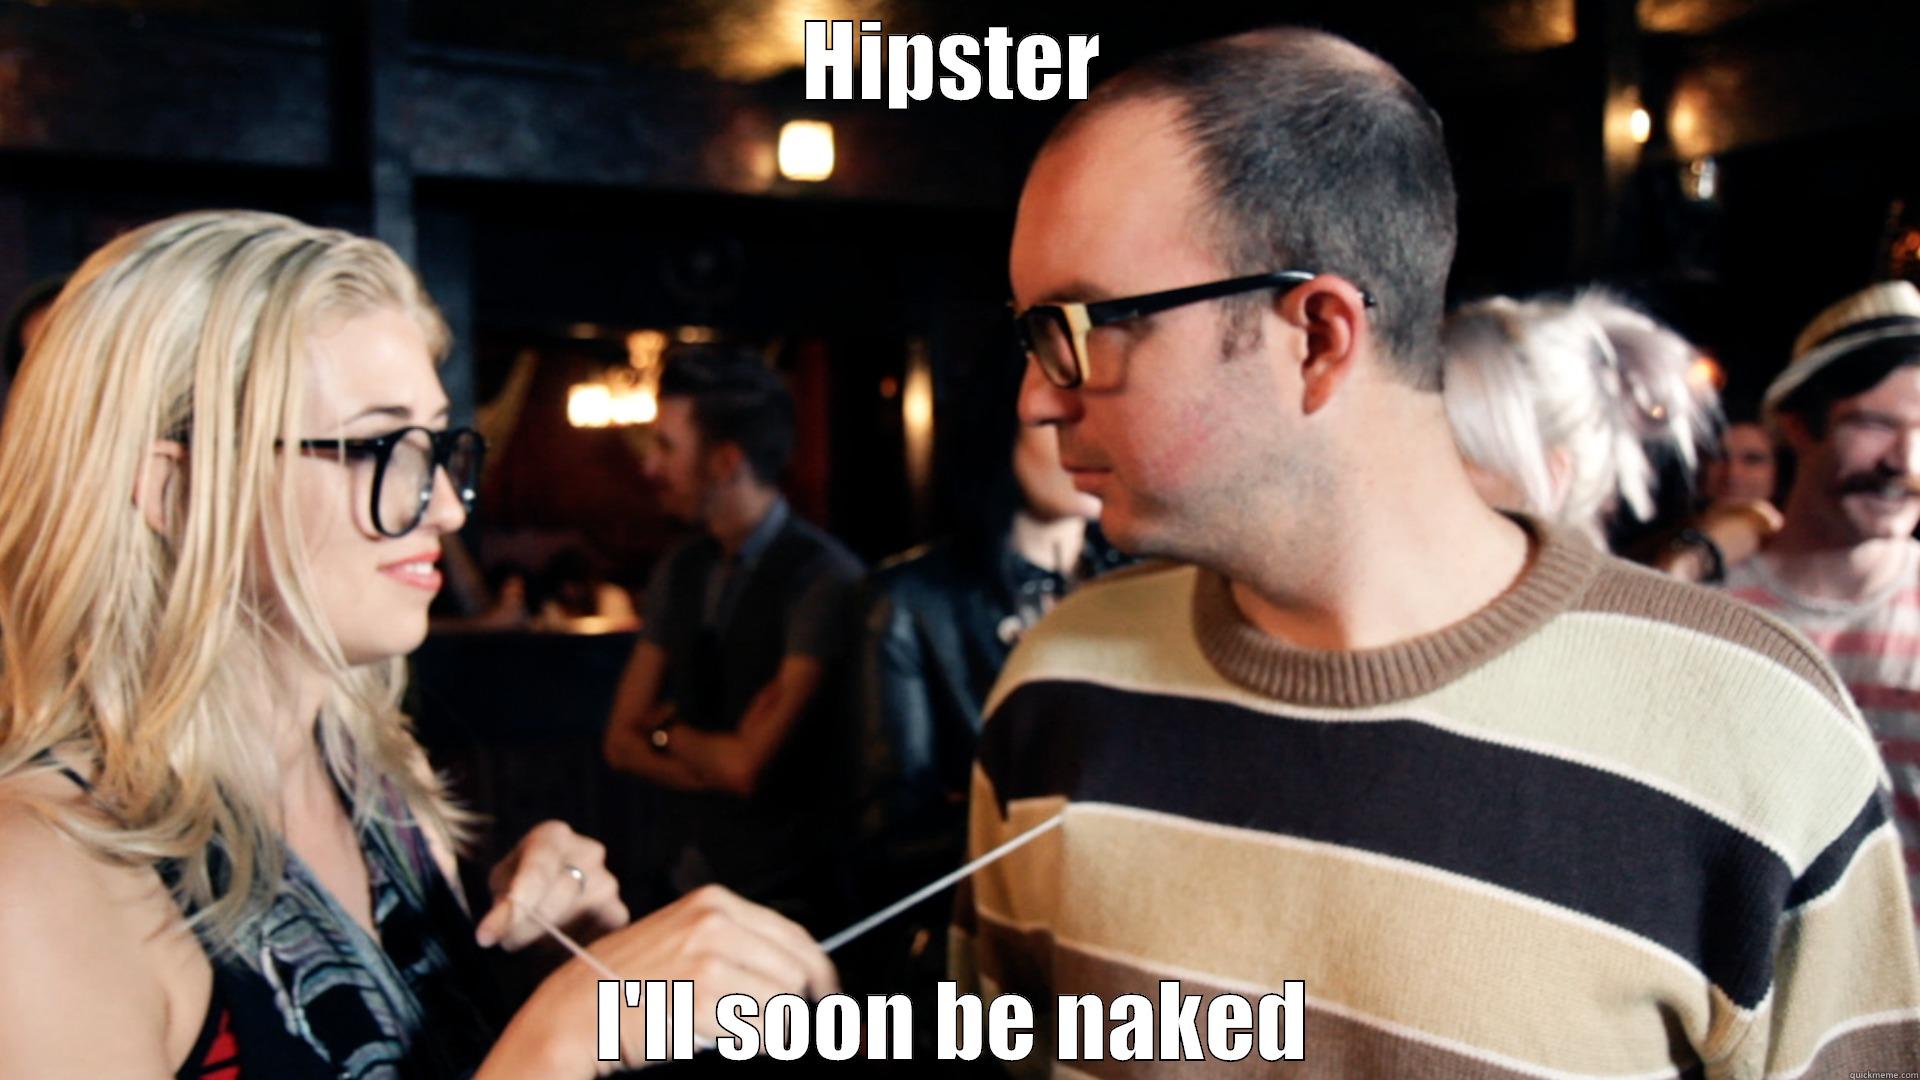 I'll soon be naked - HIPSTER I'LL SOON BE NAKED Misc